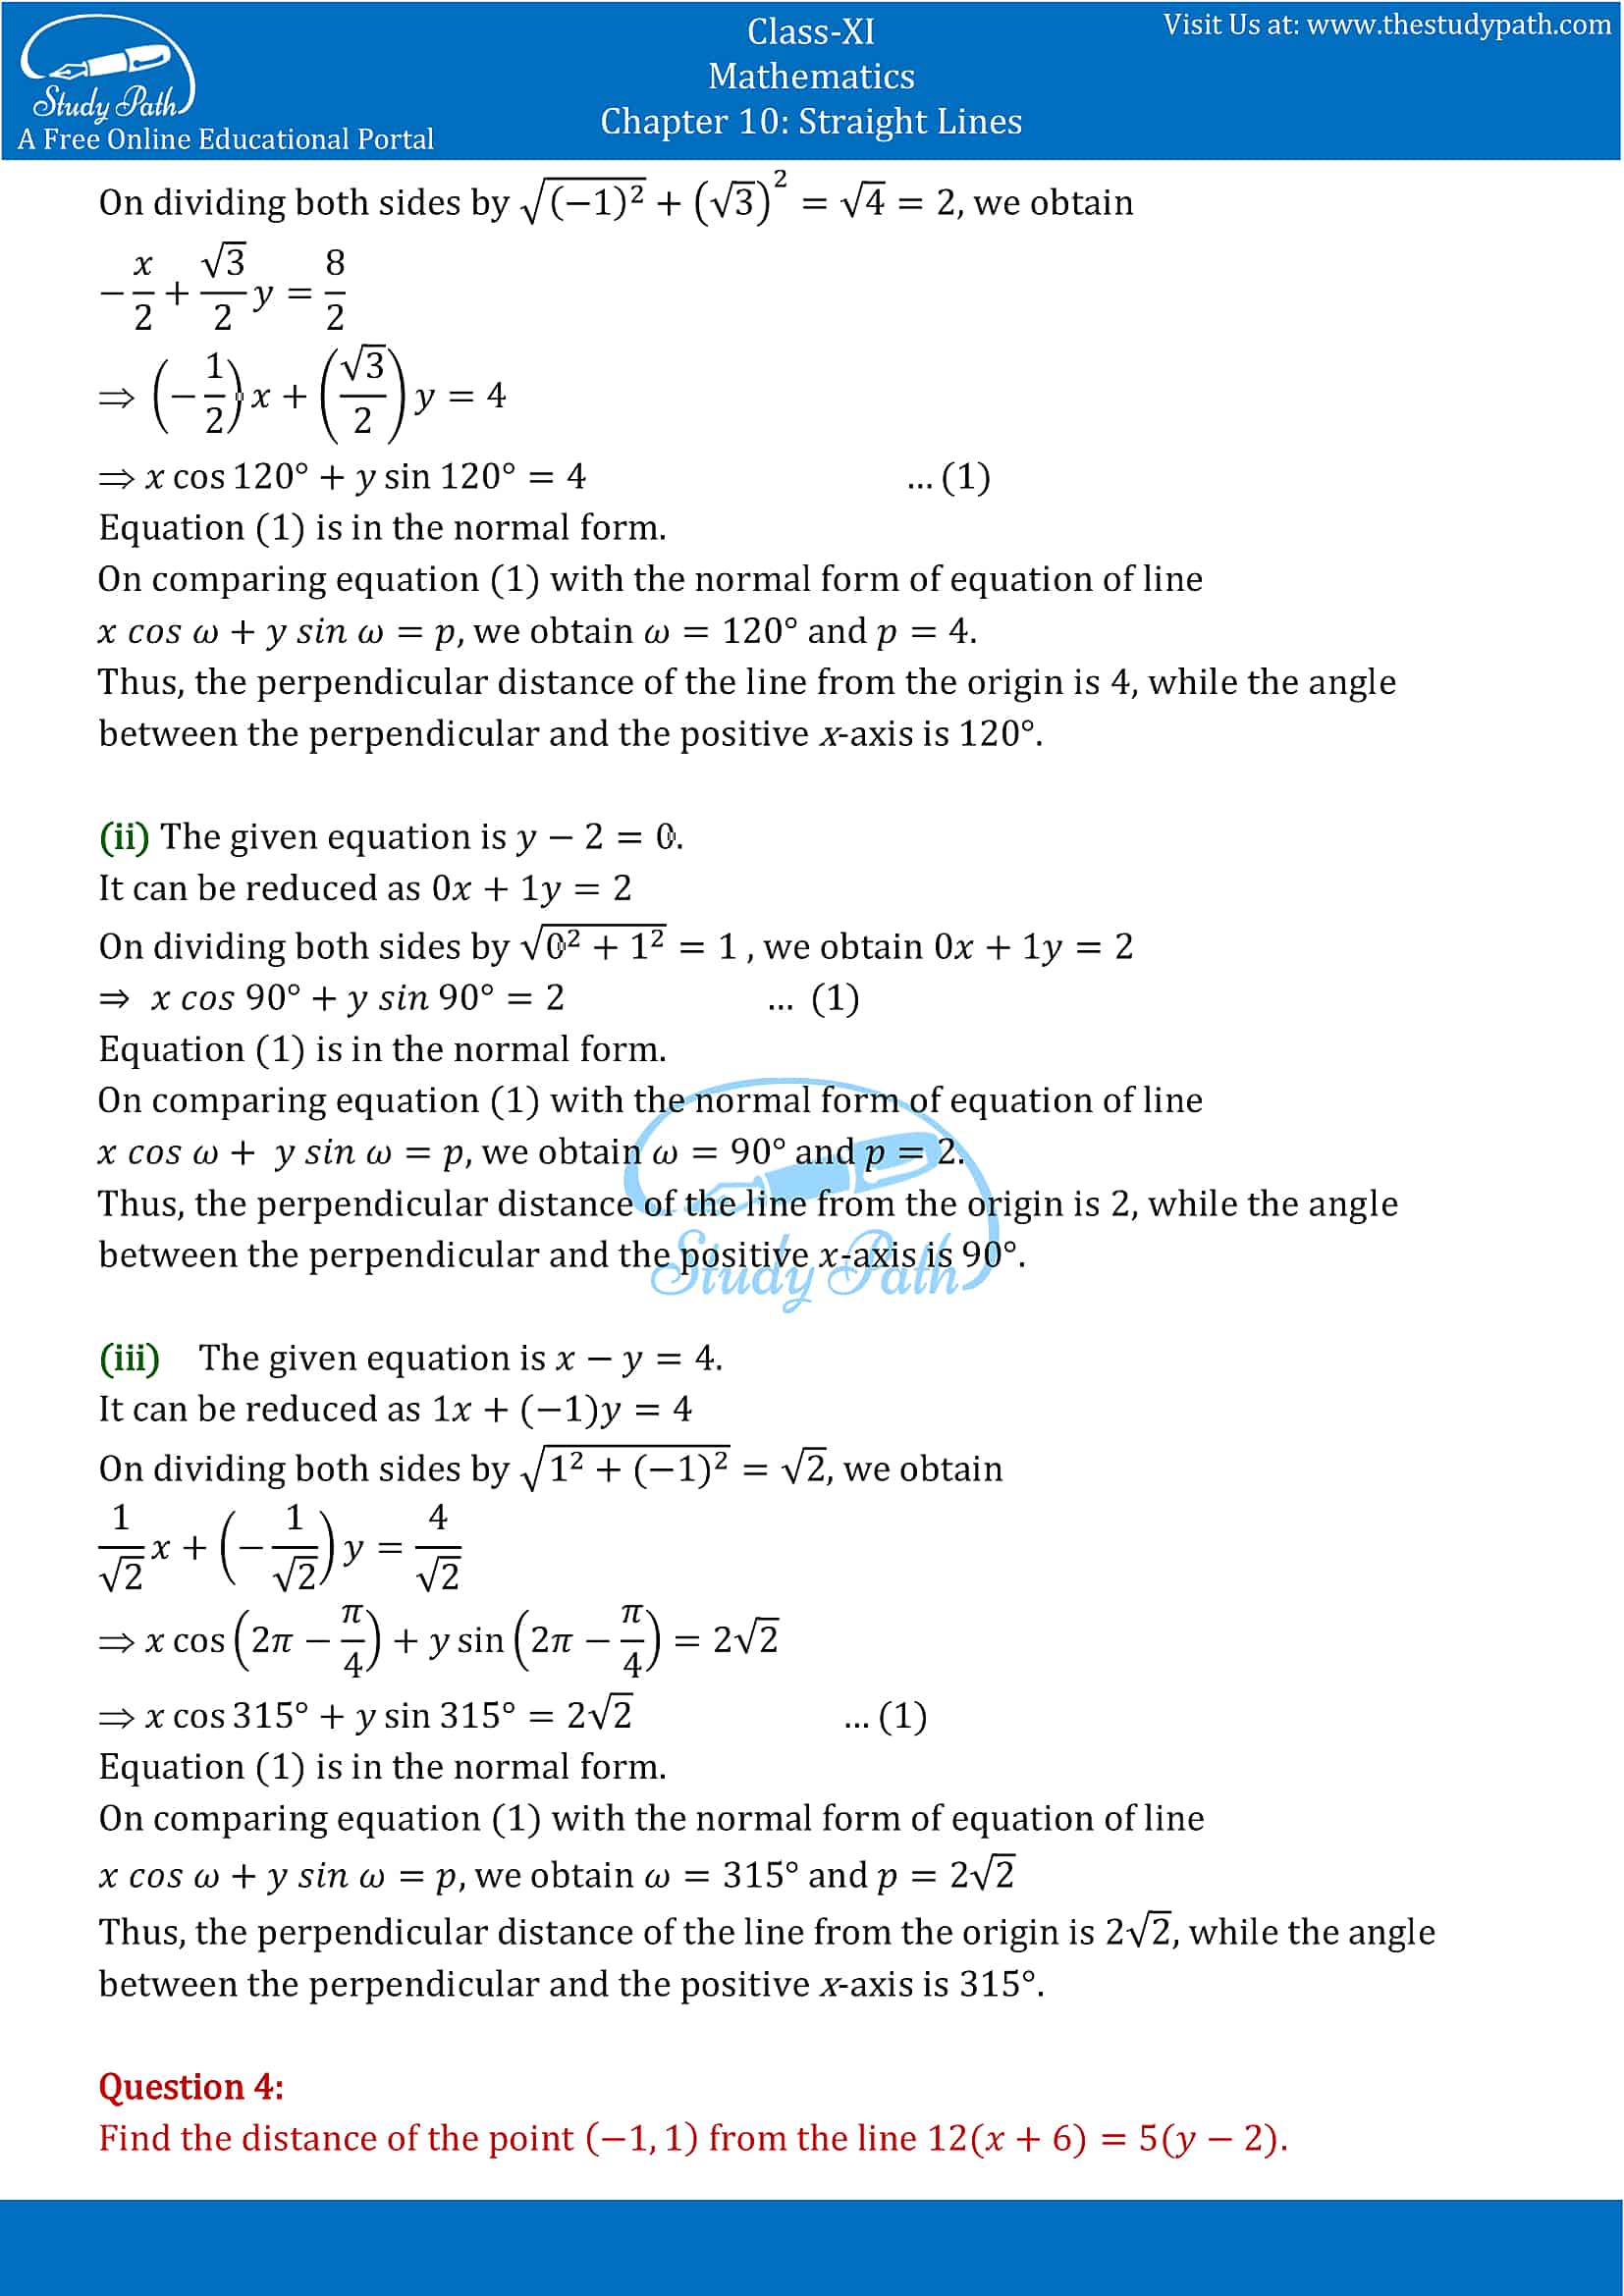 NCERT Solutions for Class 11 Maths chapter 10 Straight Lines Exercise 10.3 part-3